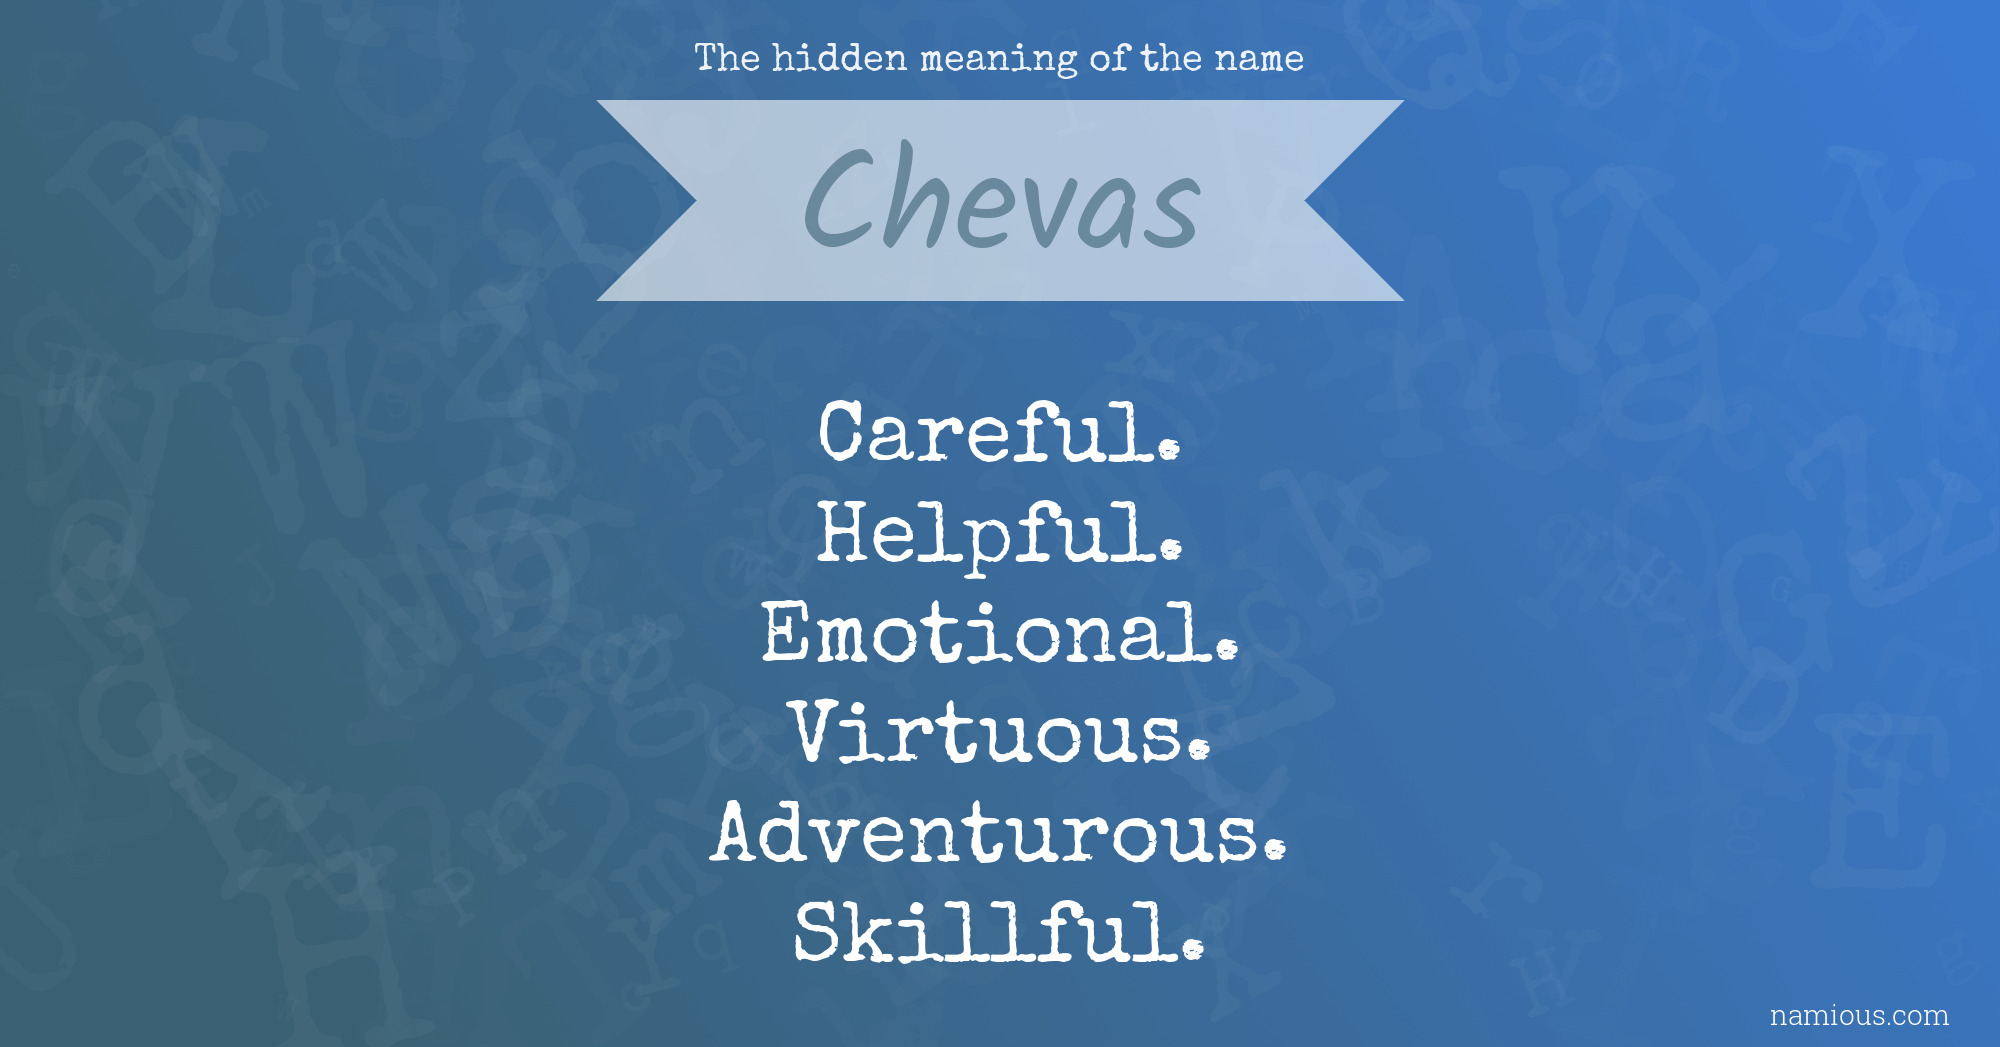 The hidden meaning of the name Chevas